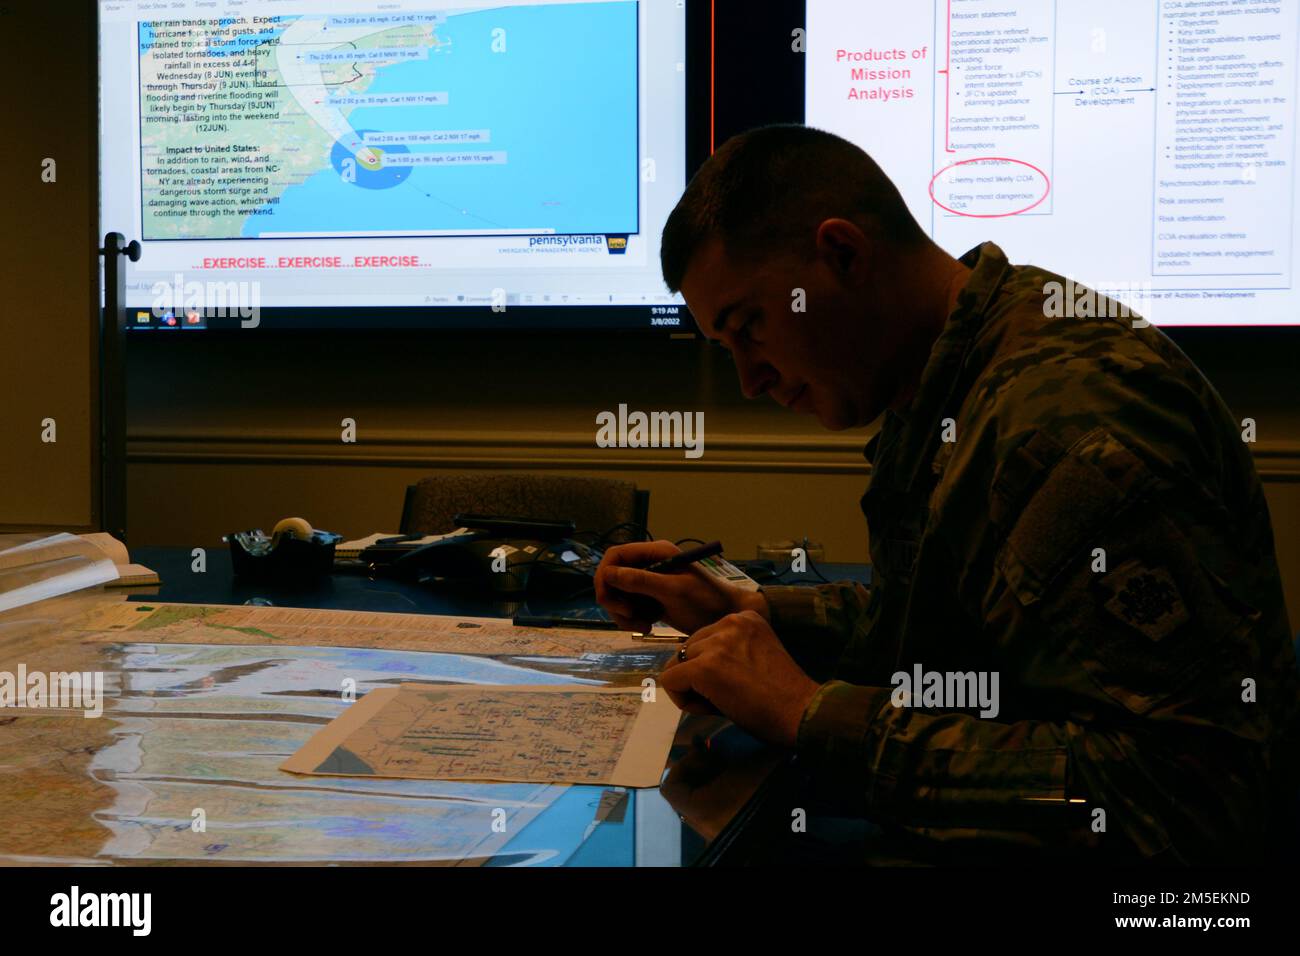 Capt. Brandon Sweeney, current operations officer, Pennsylvania National Guard, marks unit locations on a map of Pennsylvania during a staff training course March 8. The trial course, hosted by U.S. Northern Command, will be the Phase II of the Joint Staff Training Course. The course trained staff on emergency preparedness using a notional Category 2 Hurricane scenario. Stock Photo